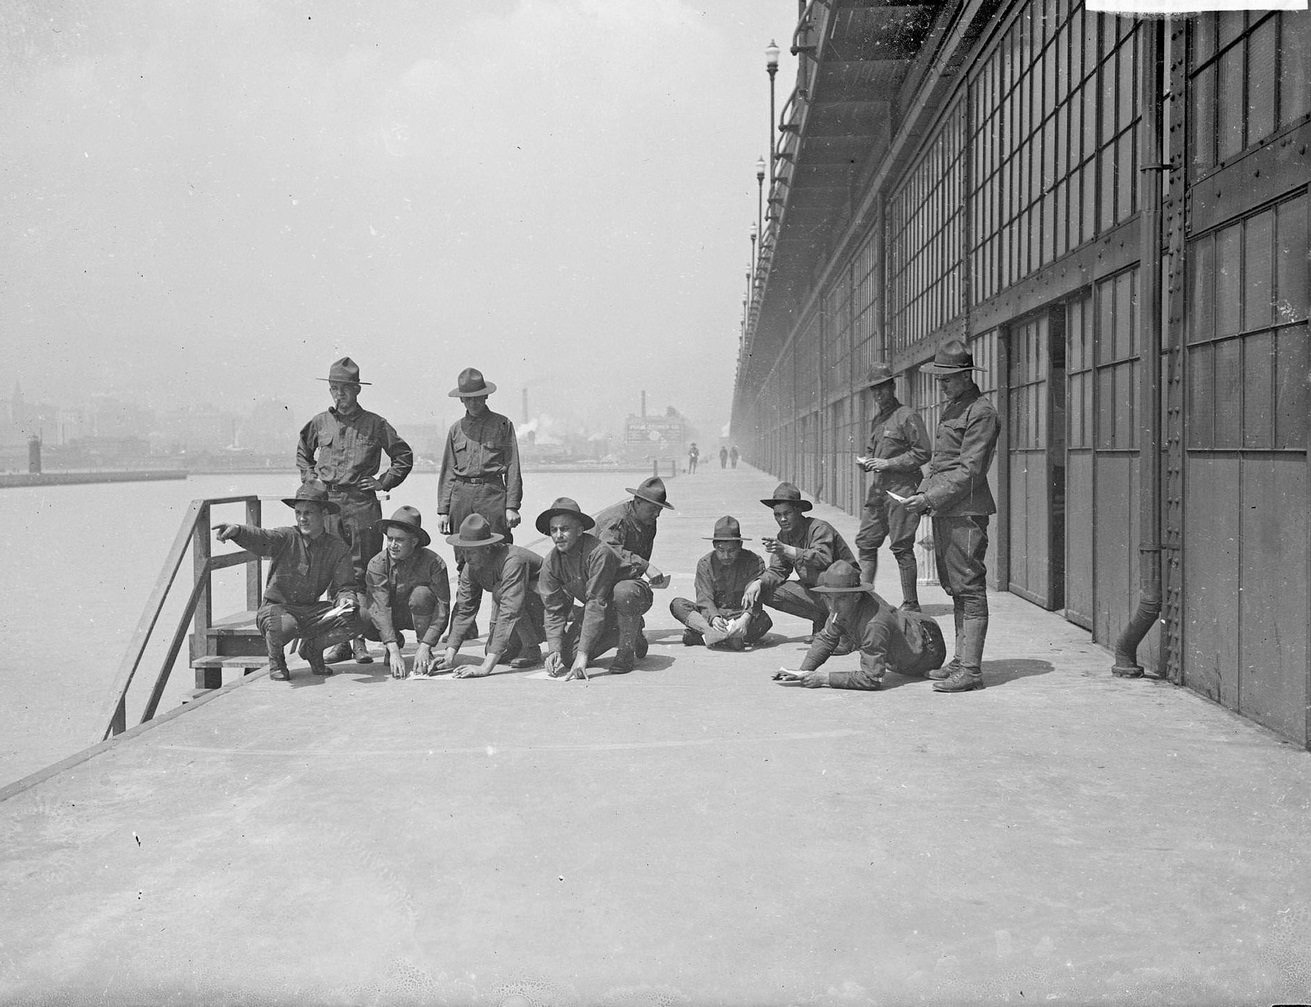 US Army, 3rd Reserve Engineers, gathering on the cement outside the building at the Municipal Pier (Navy Pier), Chicago, Illinois, 1910s.